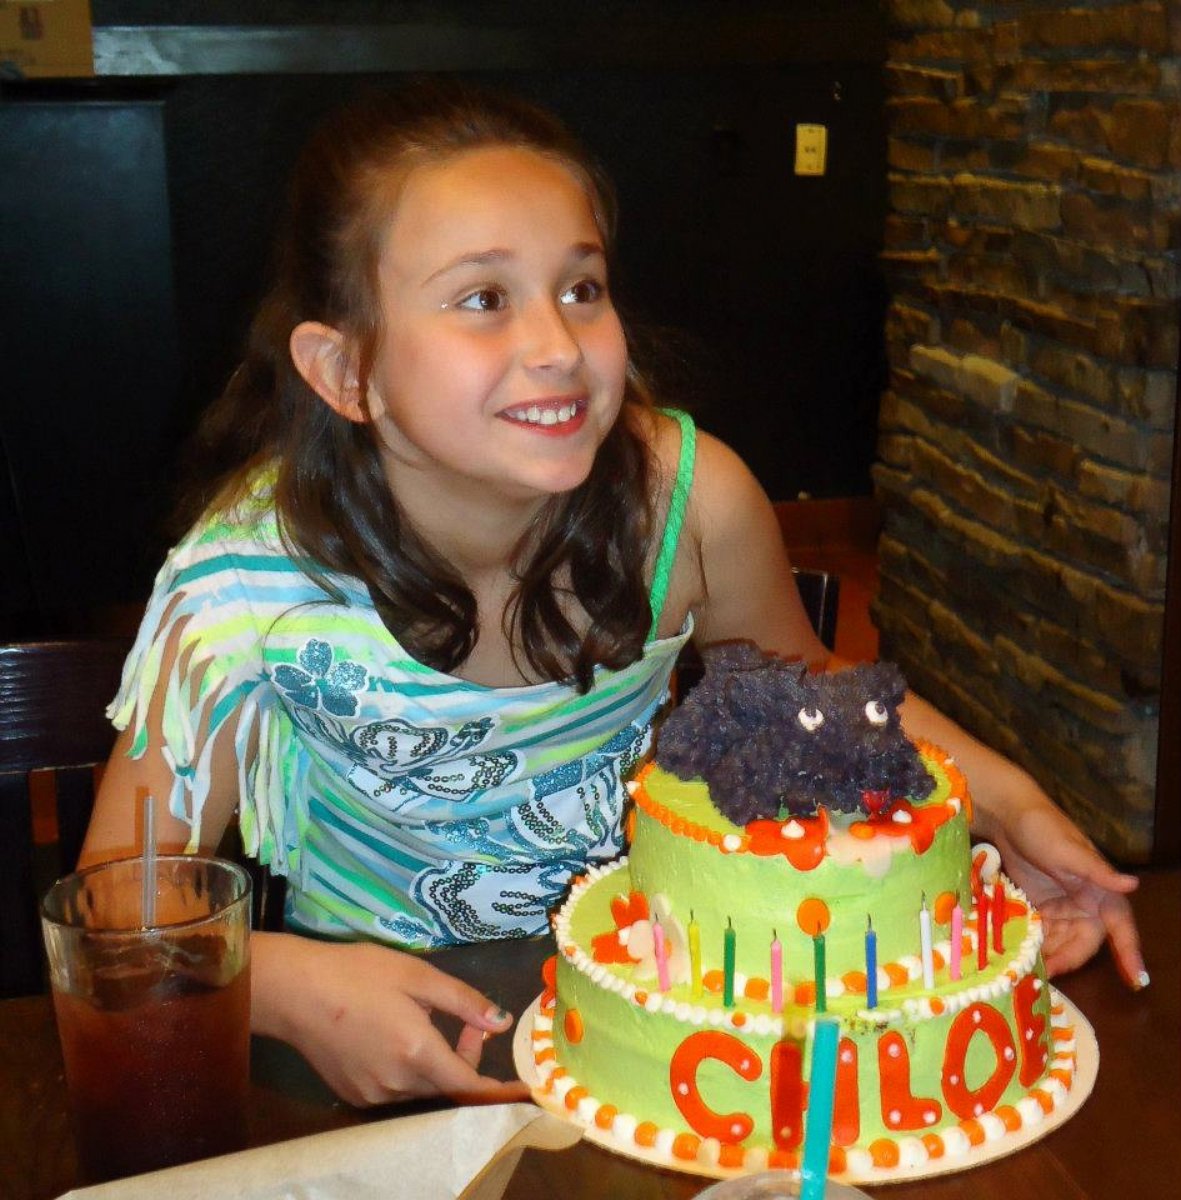 PHOTO: Chloe Stirling with a birthday cake.